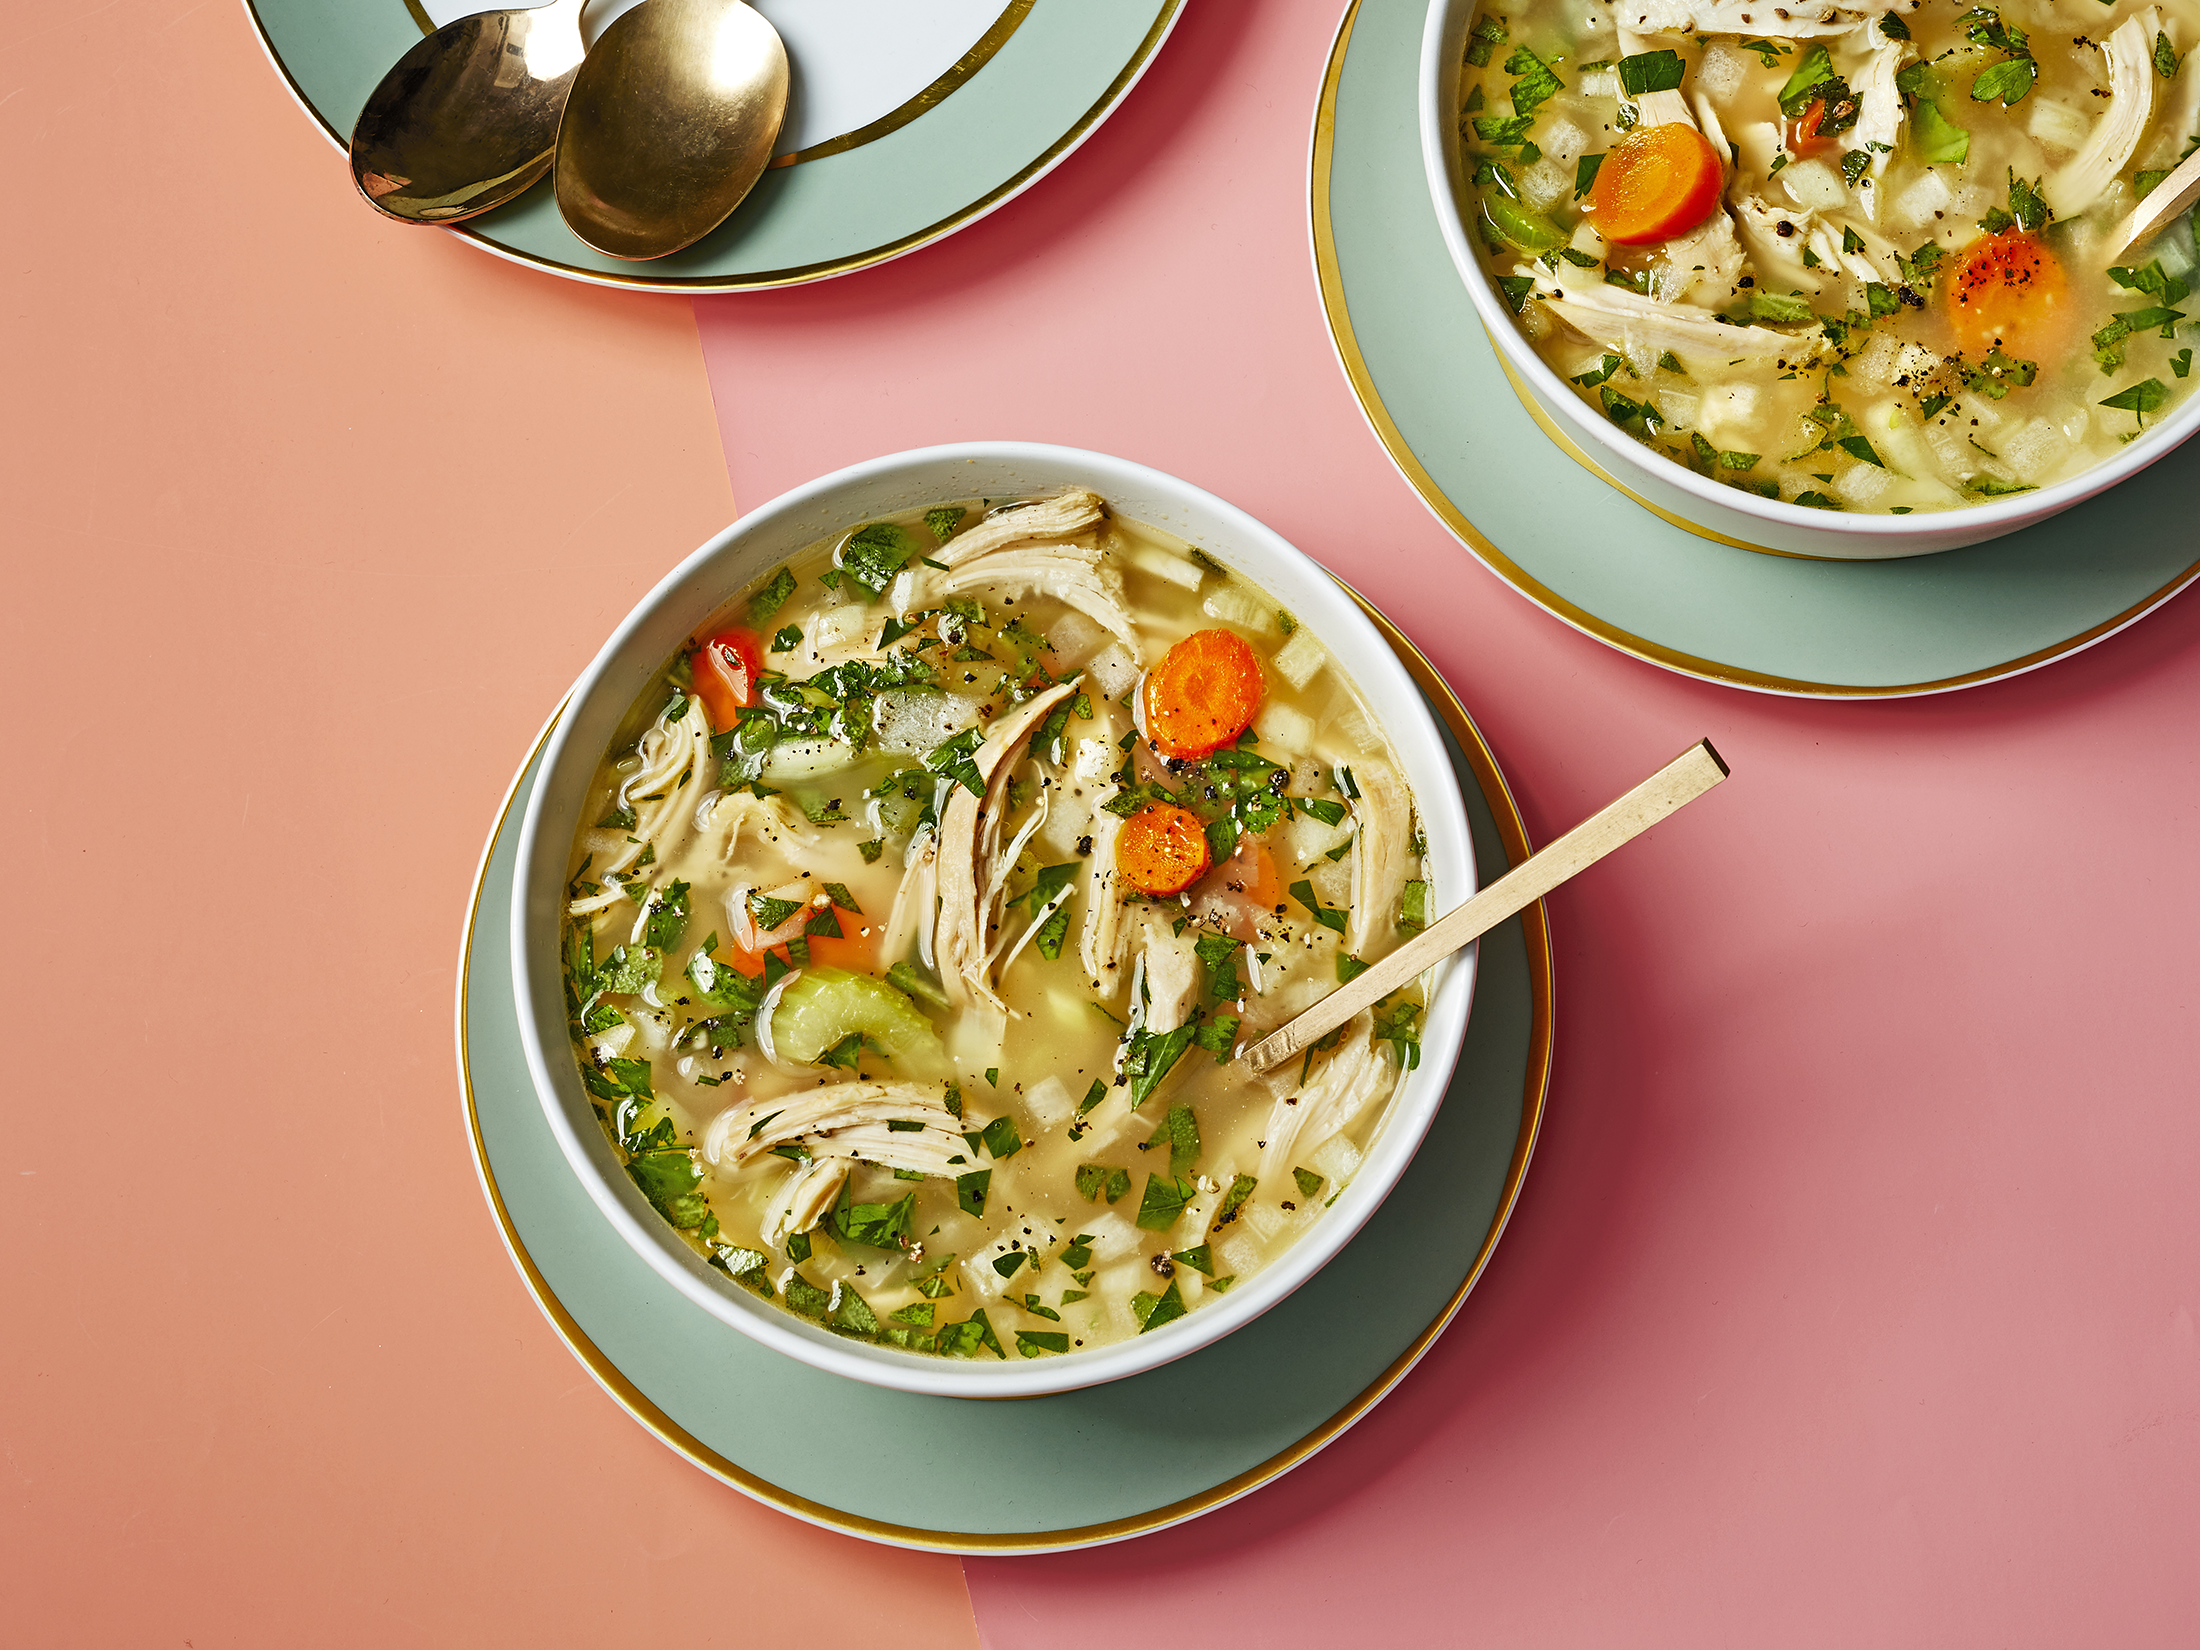 Amp Up Canned Soup to Make It a Healthy Meal